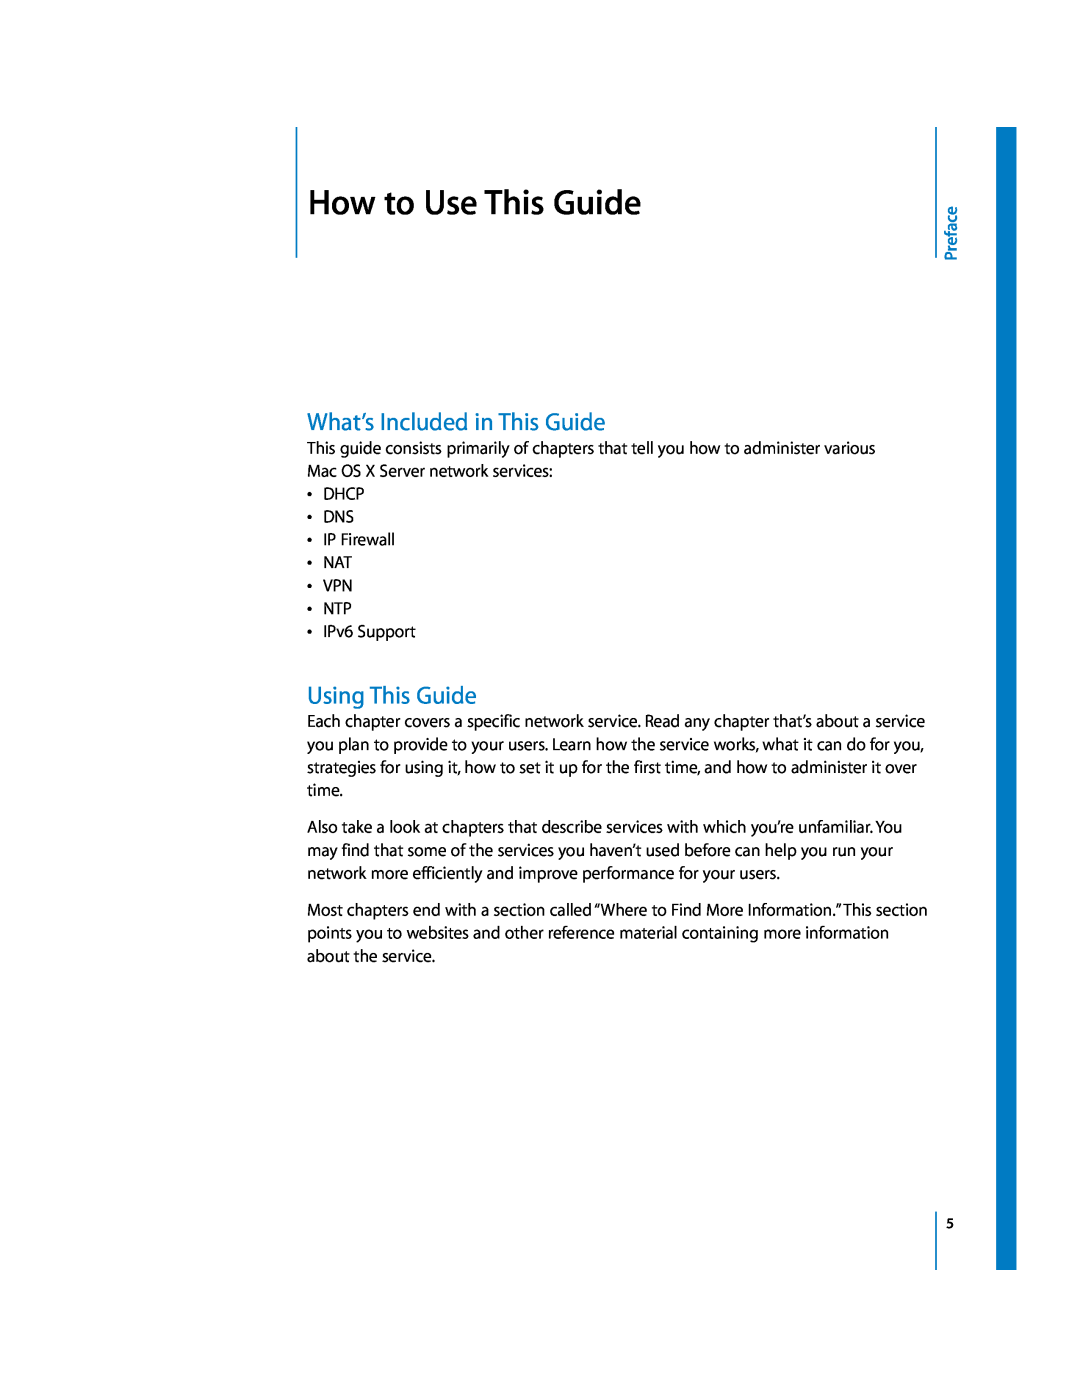 Apple 034-2351_Cvr manual How to Use This Guide, What’s Included in This Guide, Using This Guide, Preface 